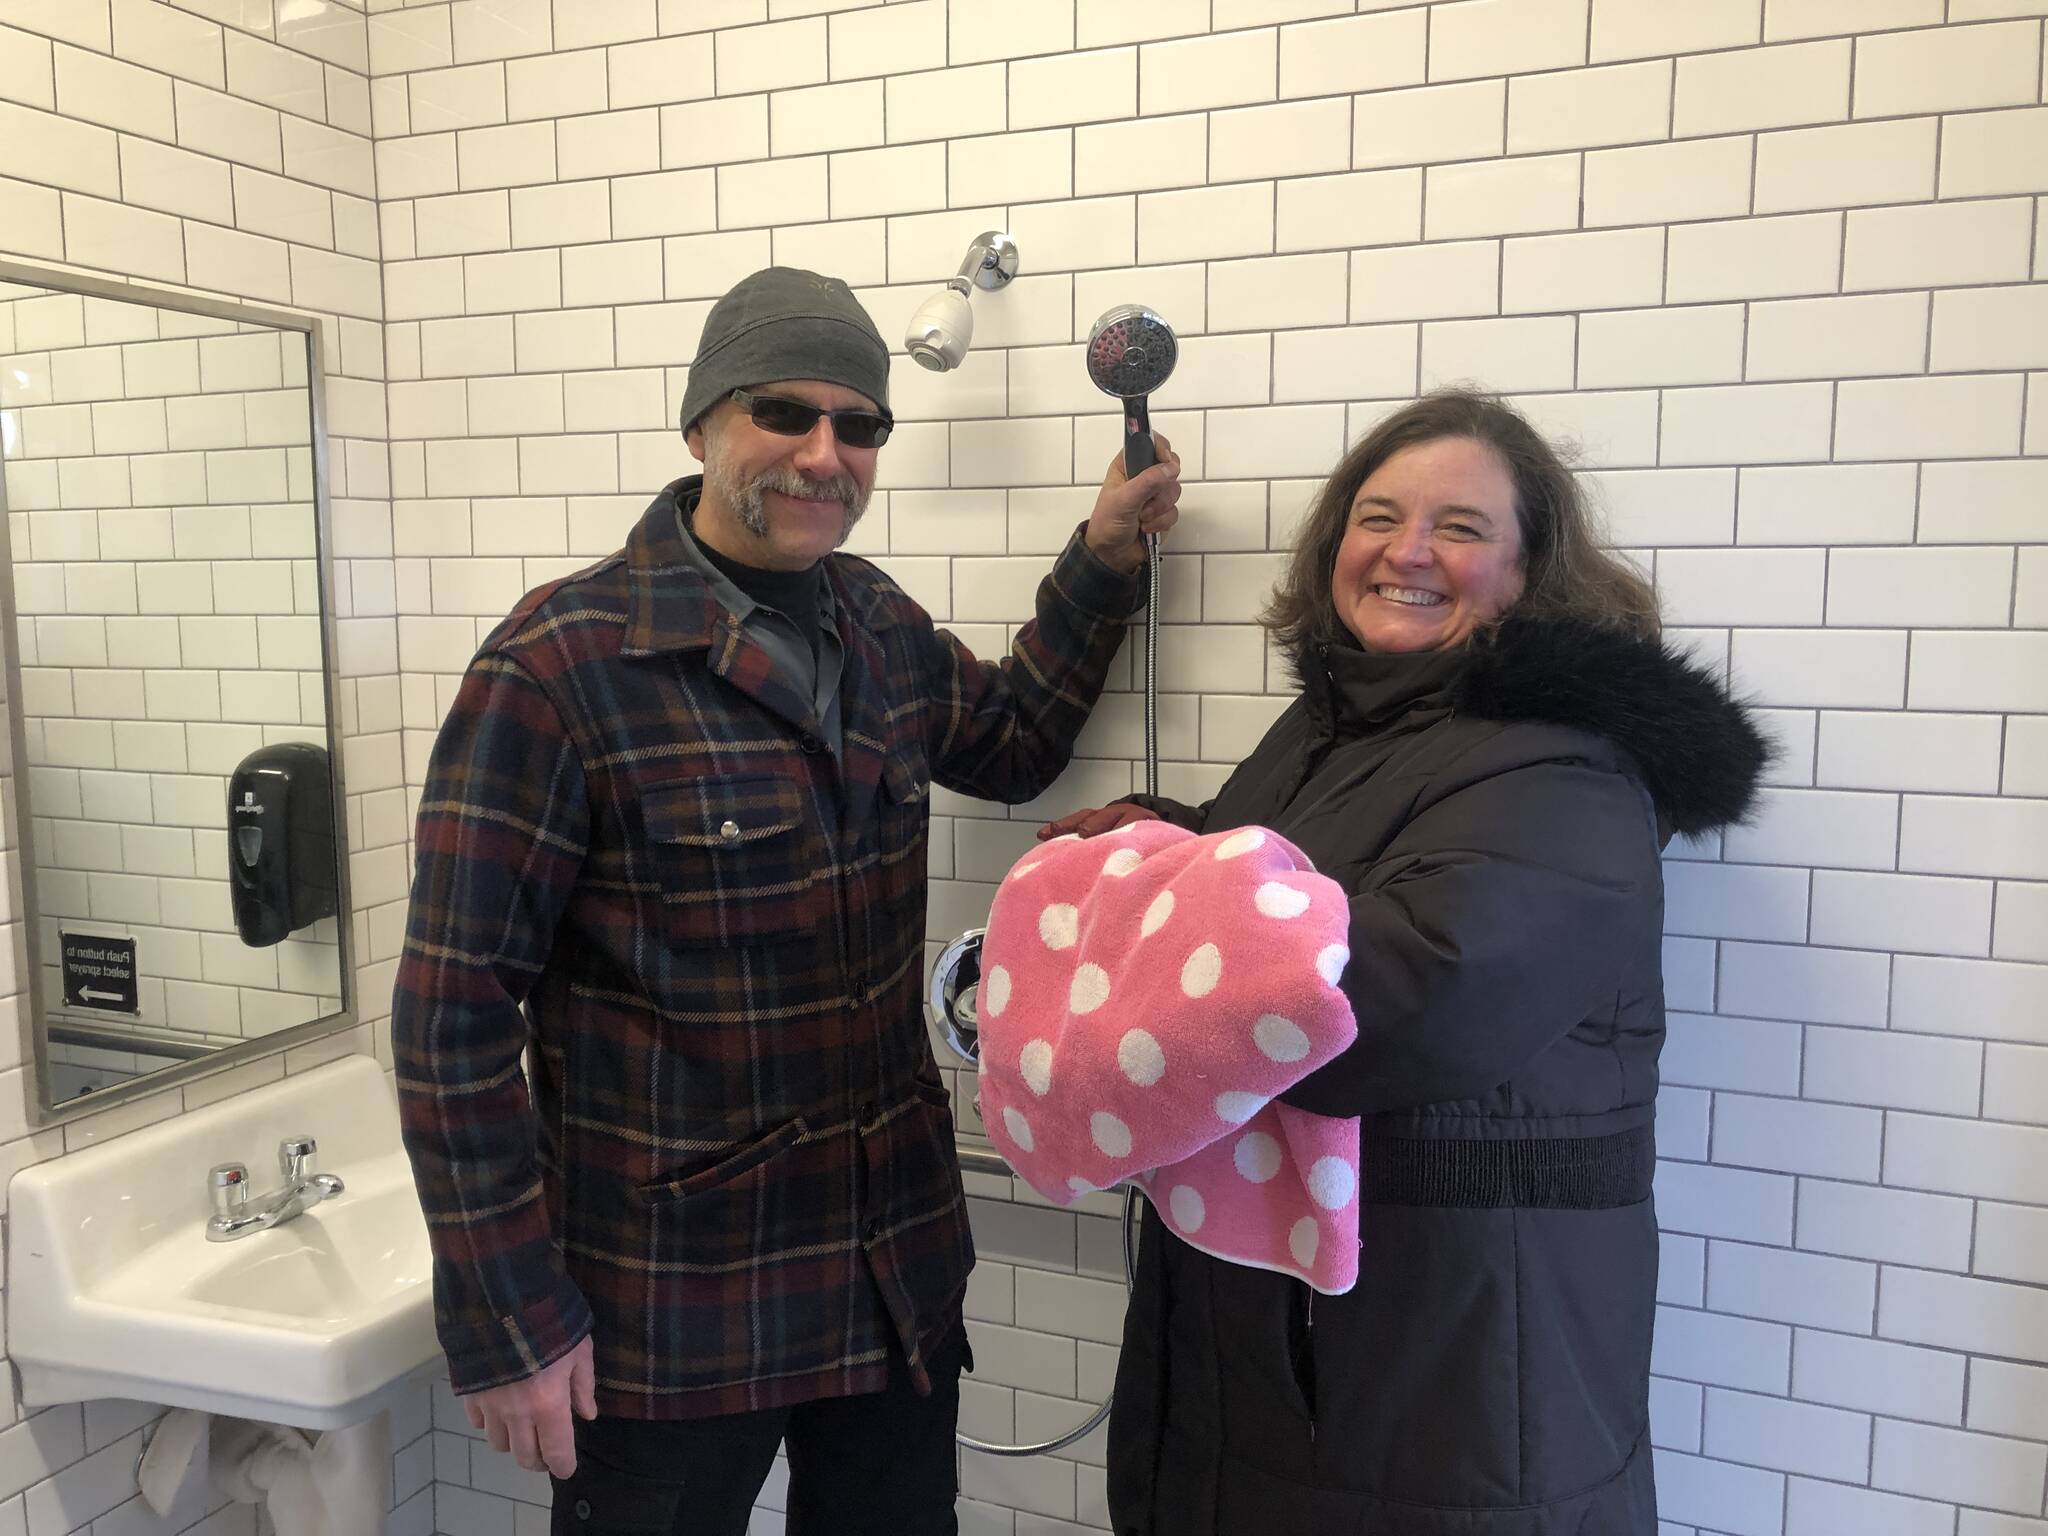 Colleen Smith/staff photo
The new bathroom and shower in the Village Green.
Colleen Smith/staff photo
Greg Sawyer & Cindy Wolf show enthusiasm for the shower.